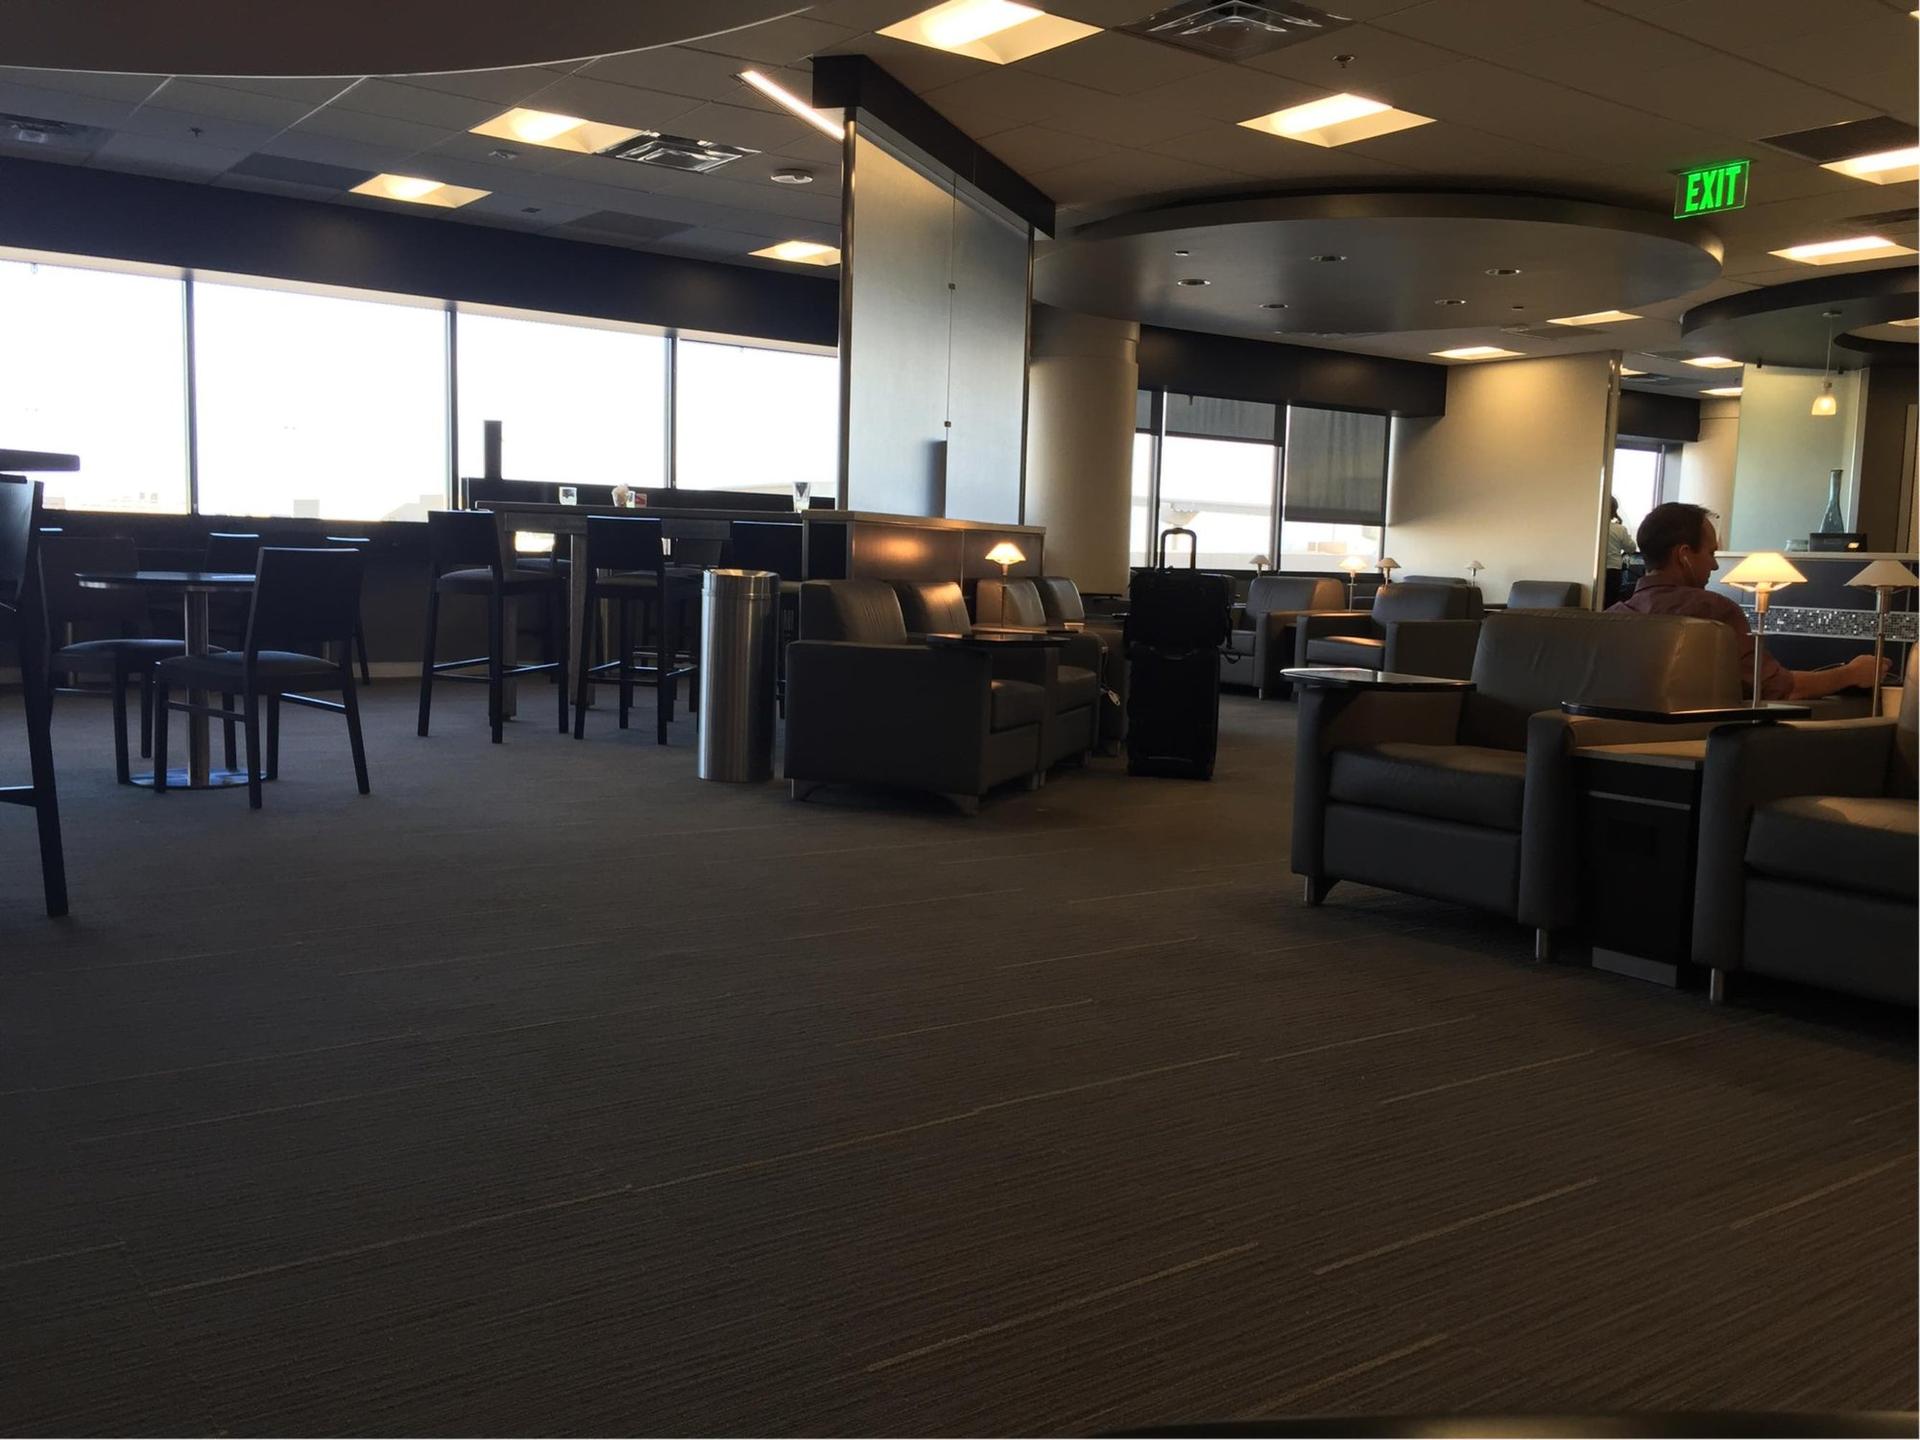 American Airlines Admirals Club image 11 of 12